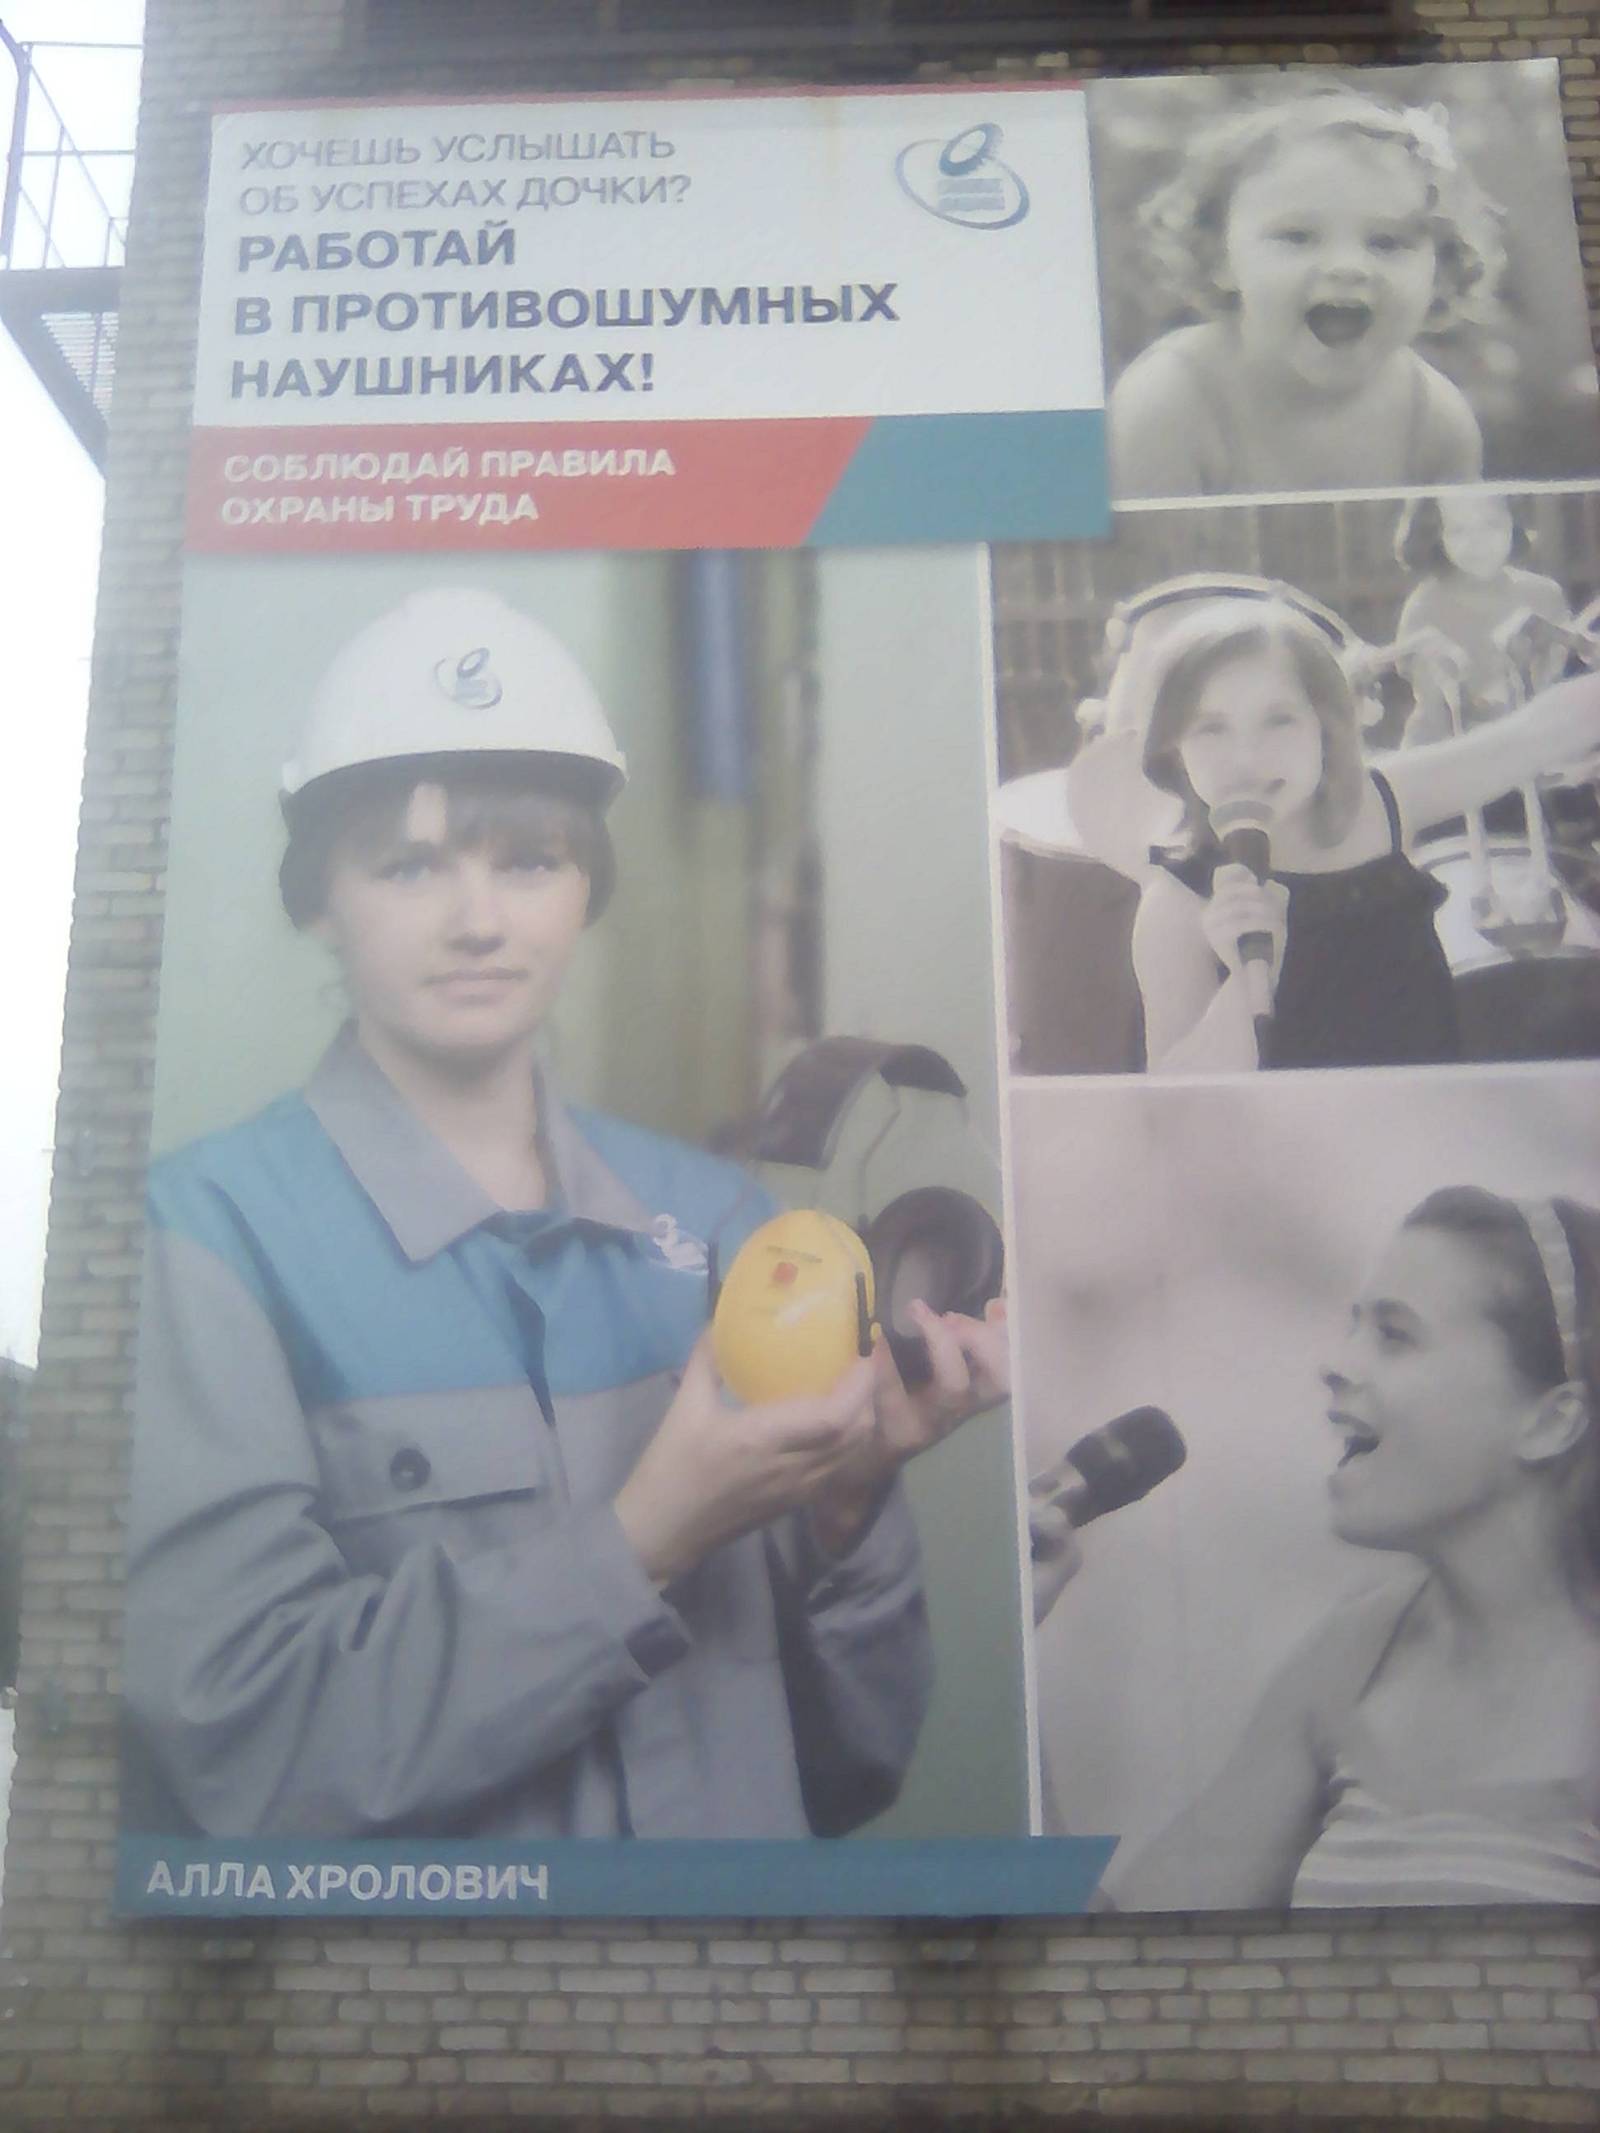 Remember TV! - Girls, beauty, Occupational Safety and Health